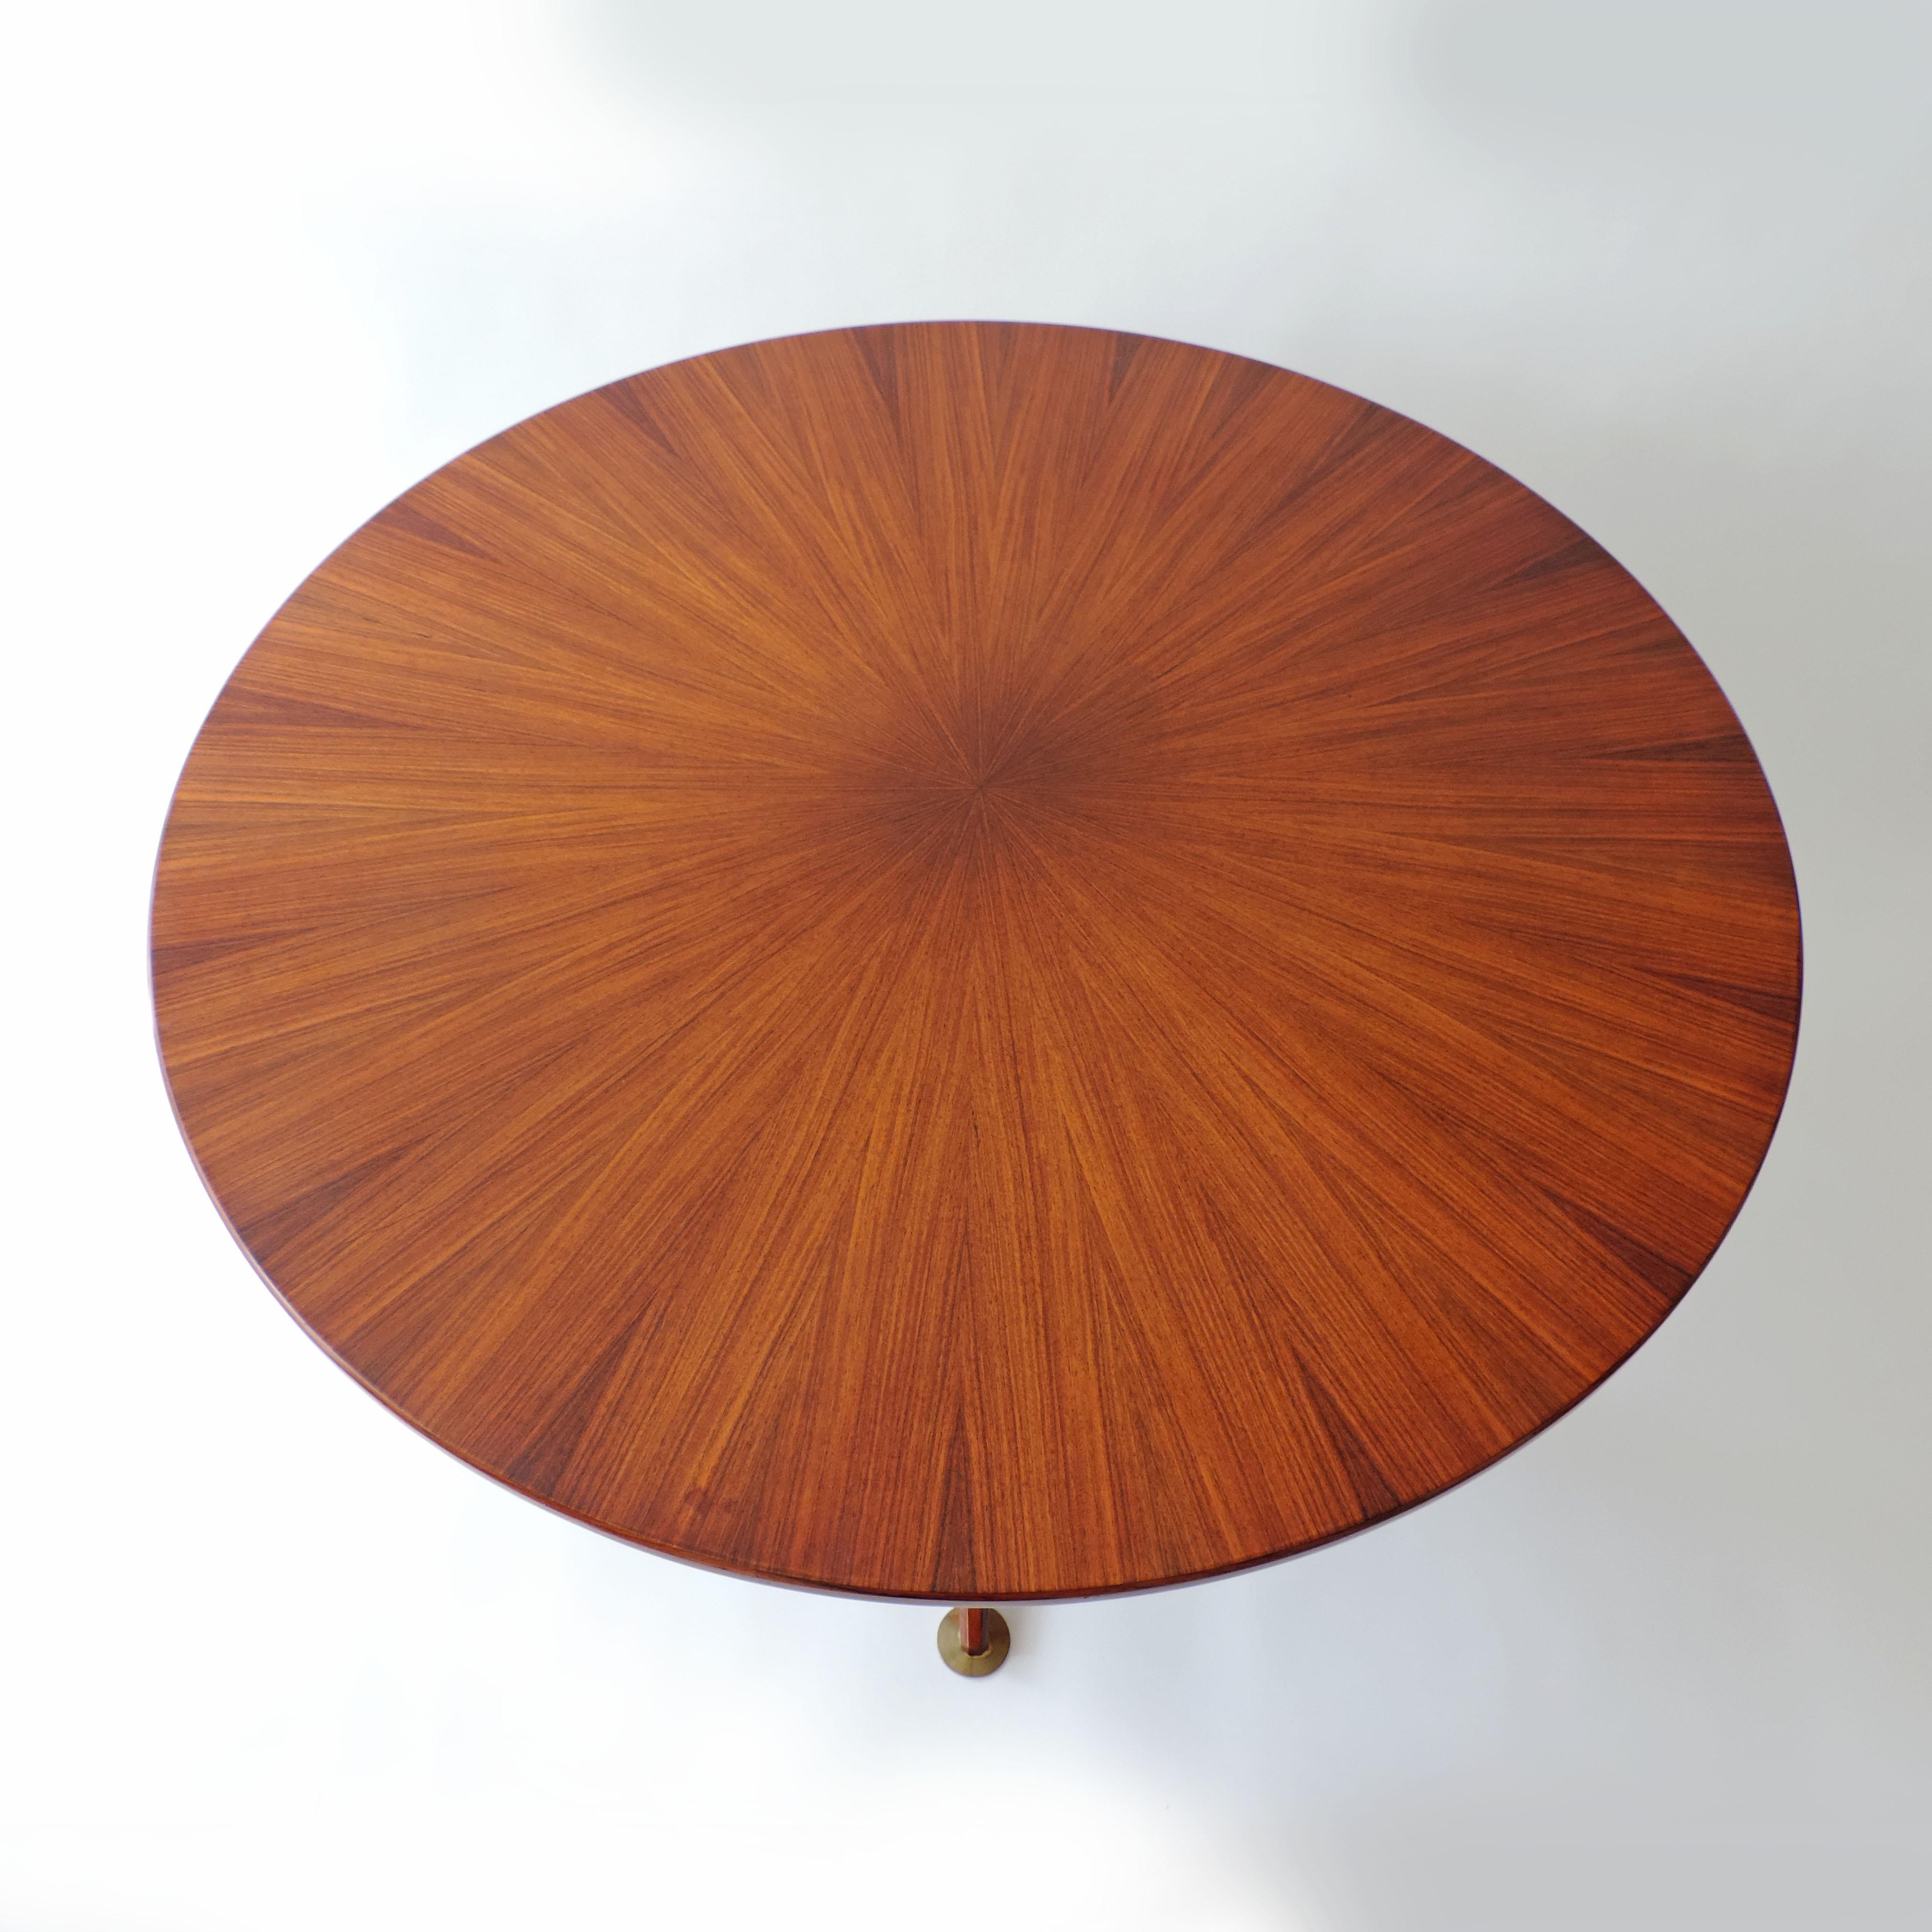 Osvaldo Borsani circular dining table in wood and brass details, Italy, 1960s For Sale 2